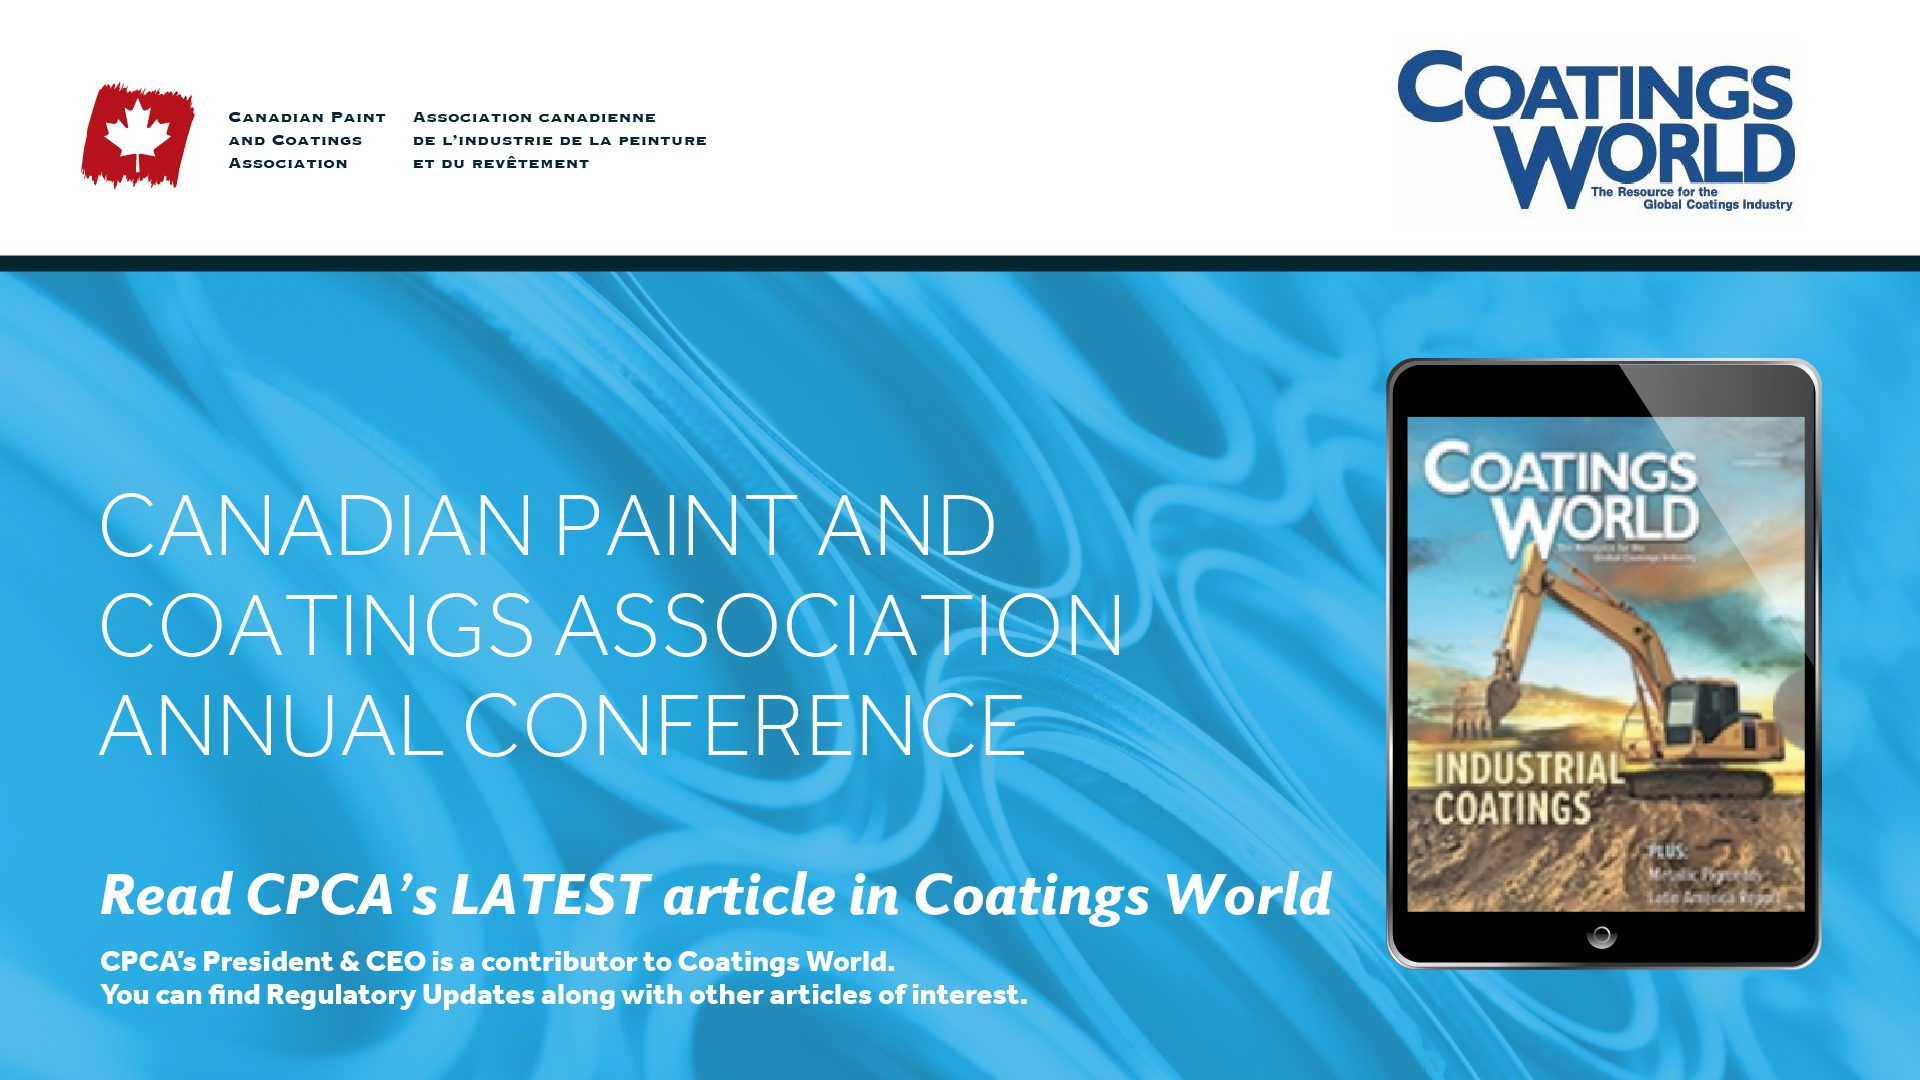 Canadian Paint and Coatings Association Annual Conference